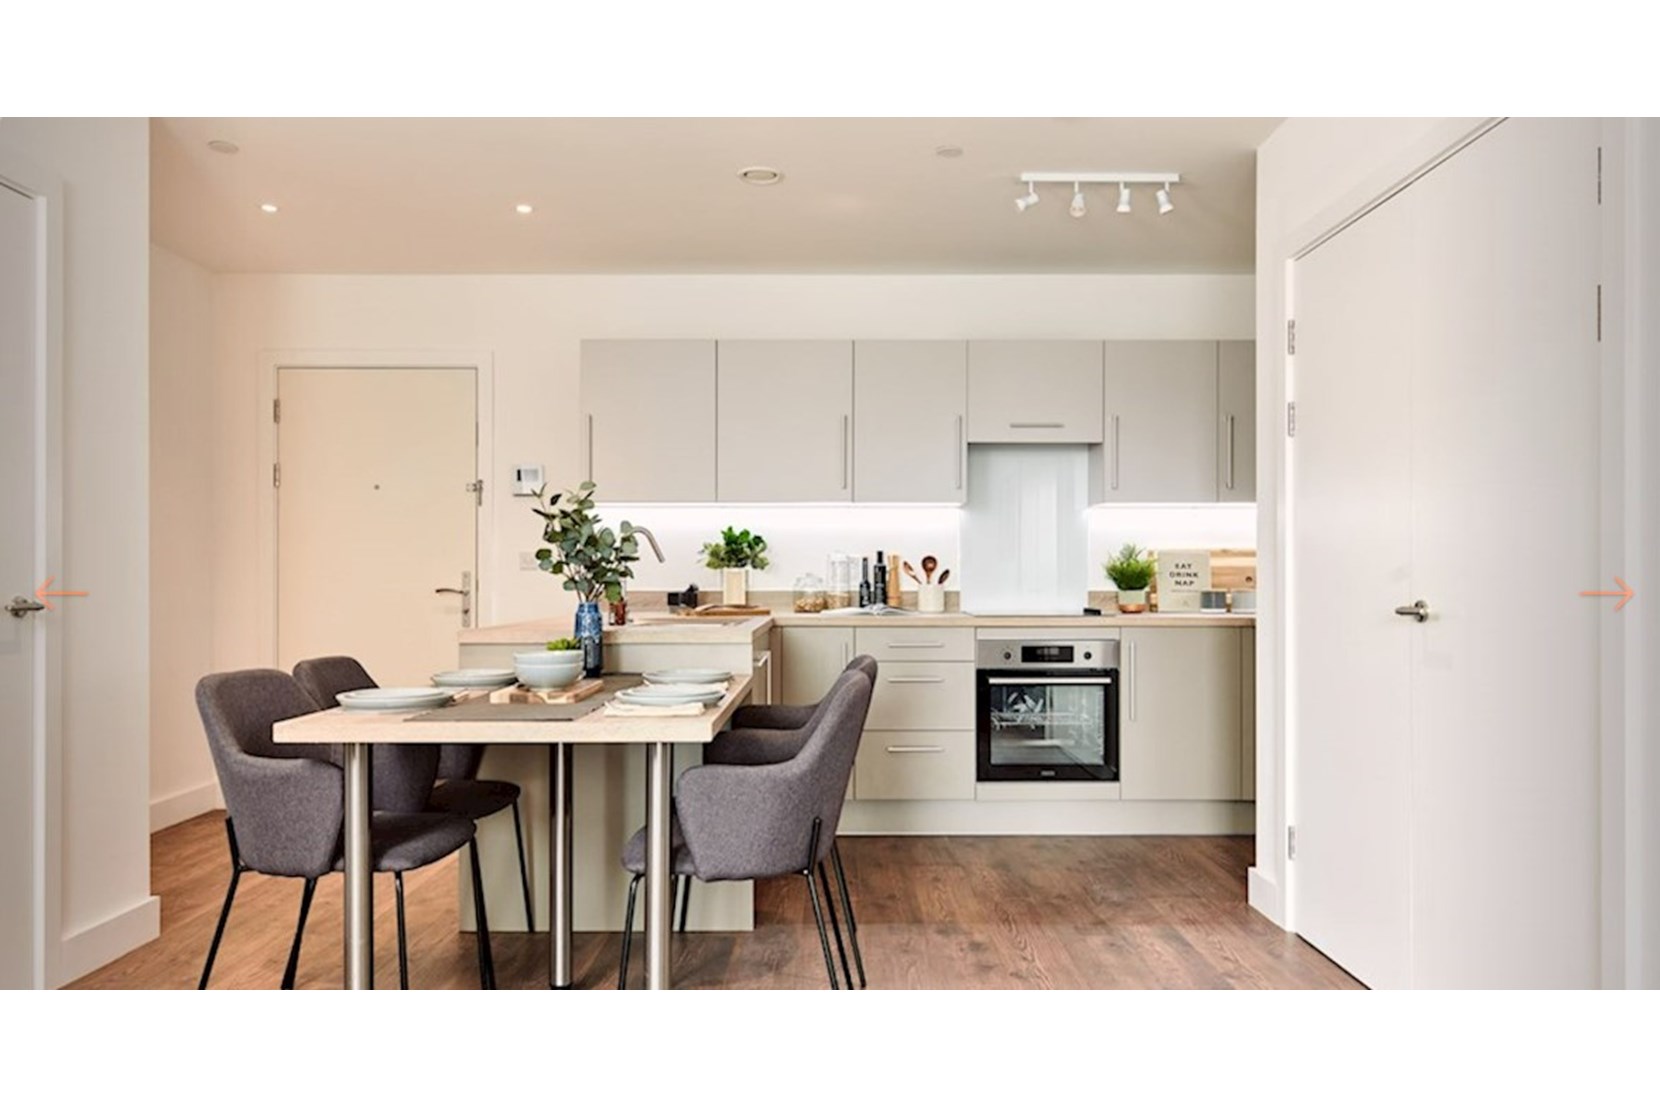 Apartment-APO-Group-Barking-Greater-London-Kitchen-Dining-Area-1